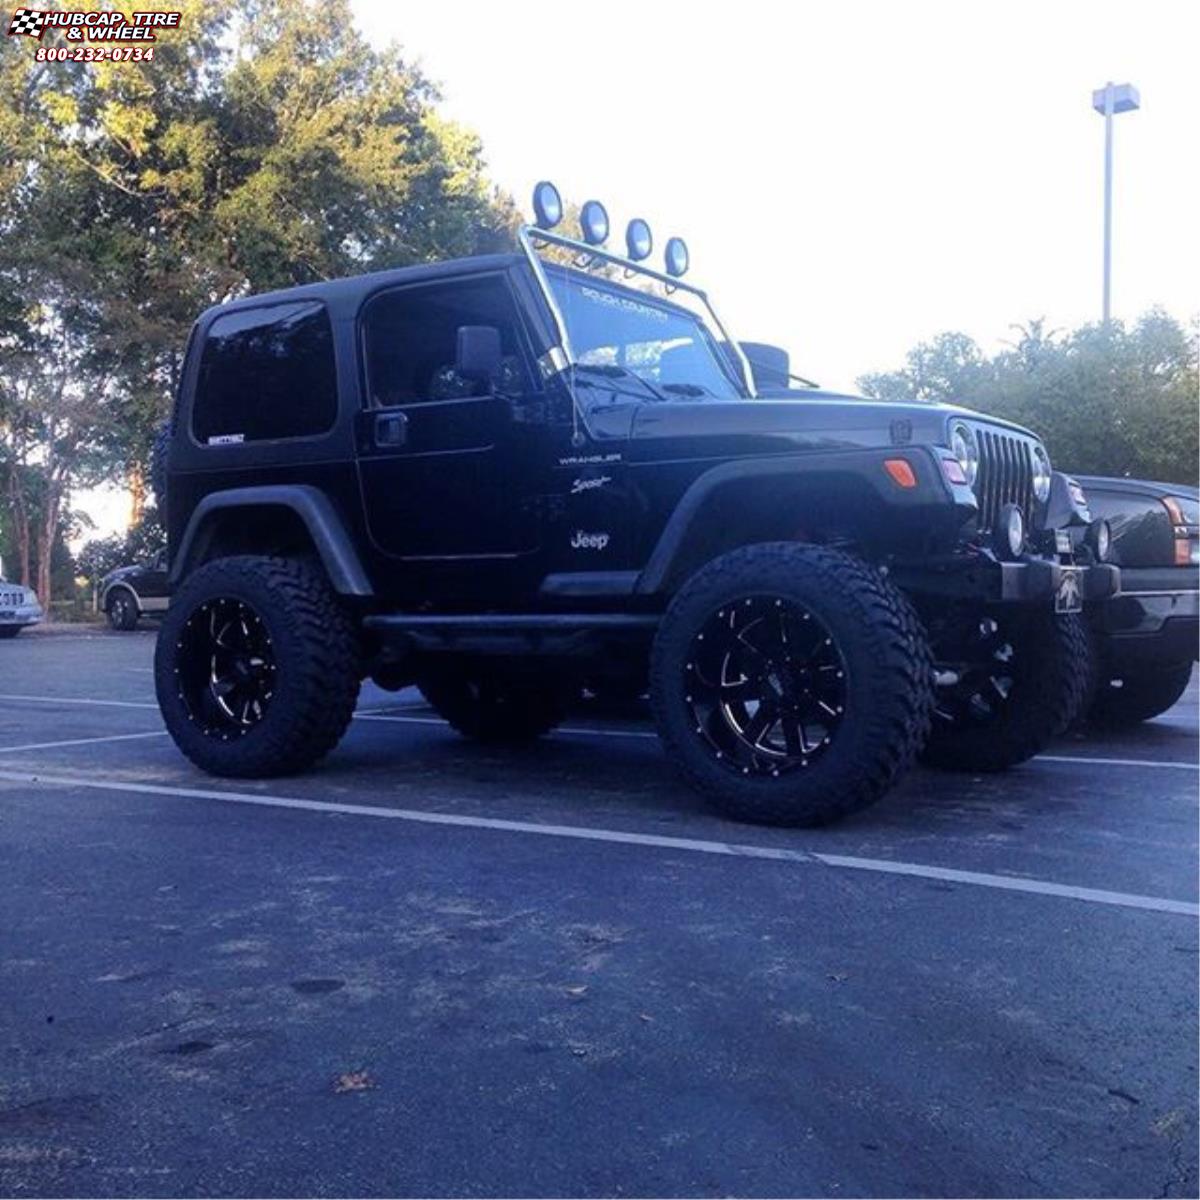 vehicle gallery/jeep wrangler moto metal mo962  Gloss Black & Milled wheels and rims